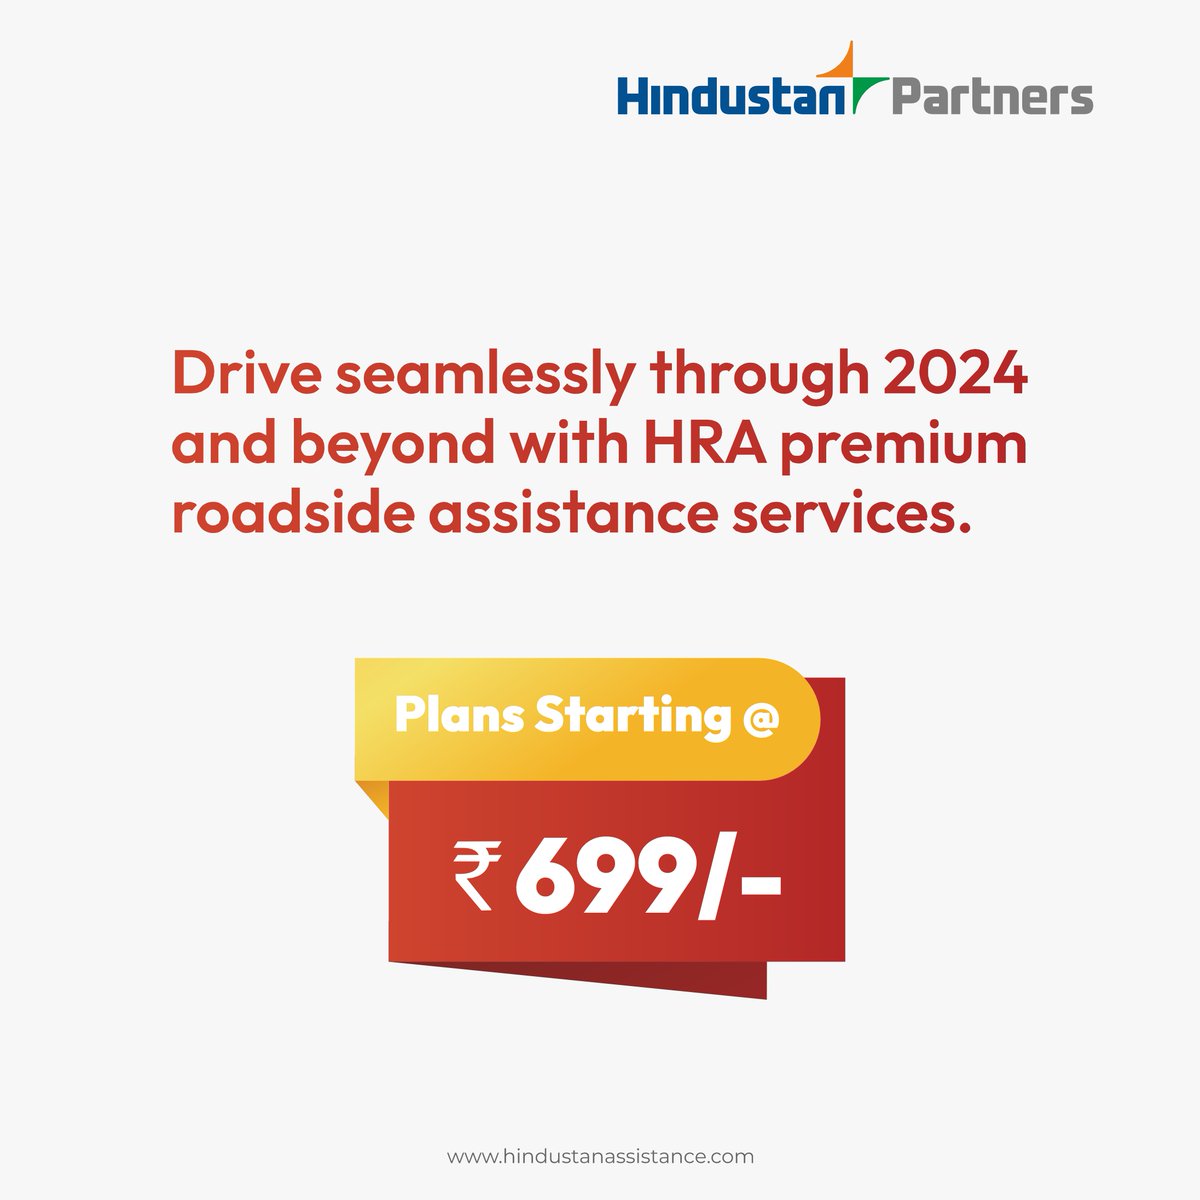 Drive worry-free in 2024 with HRA #RoadsideAssistance ! Plans from INR 699, ensuring a confident journey. Support is just a call away. Subscribe now at 1800 2121 833.
#travel #journey #24hourssupport #roadsafety #safety #vehiclecare #captaincy #Siraj #Japan #GalaxyUnpacked